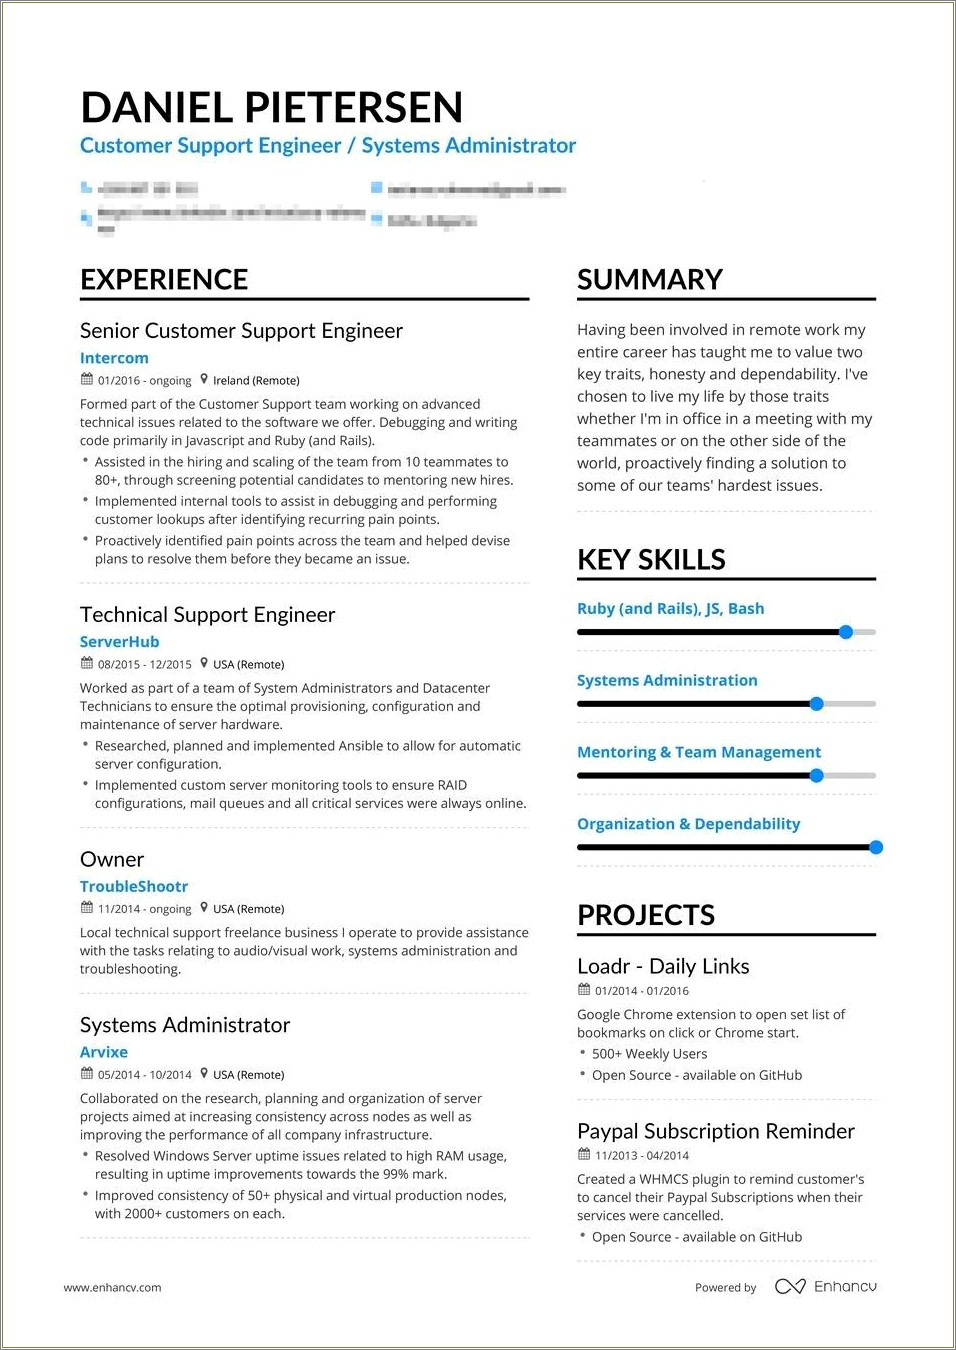 Words That Stand Out In A Resume